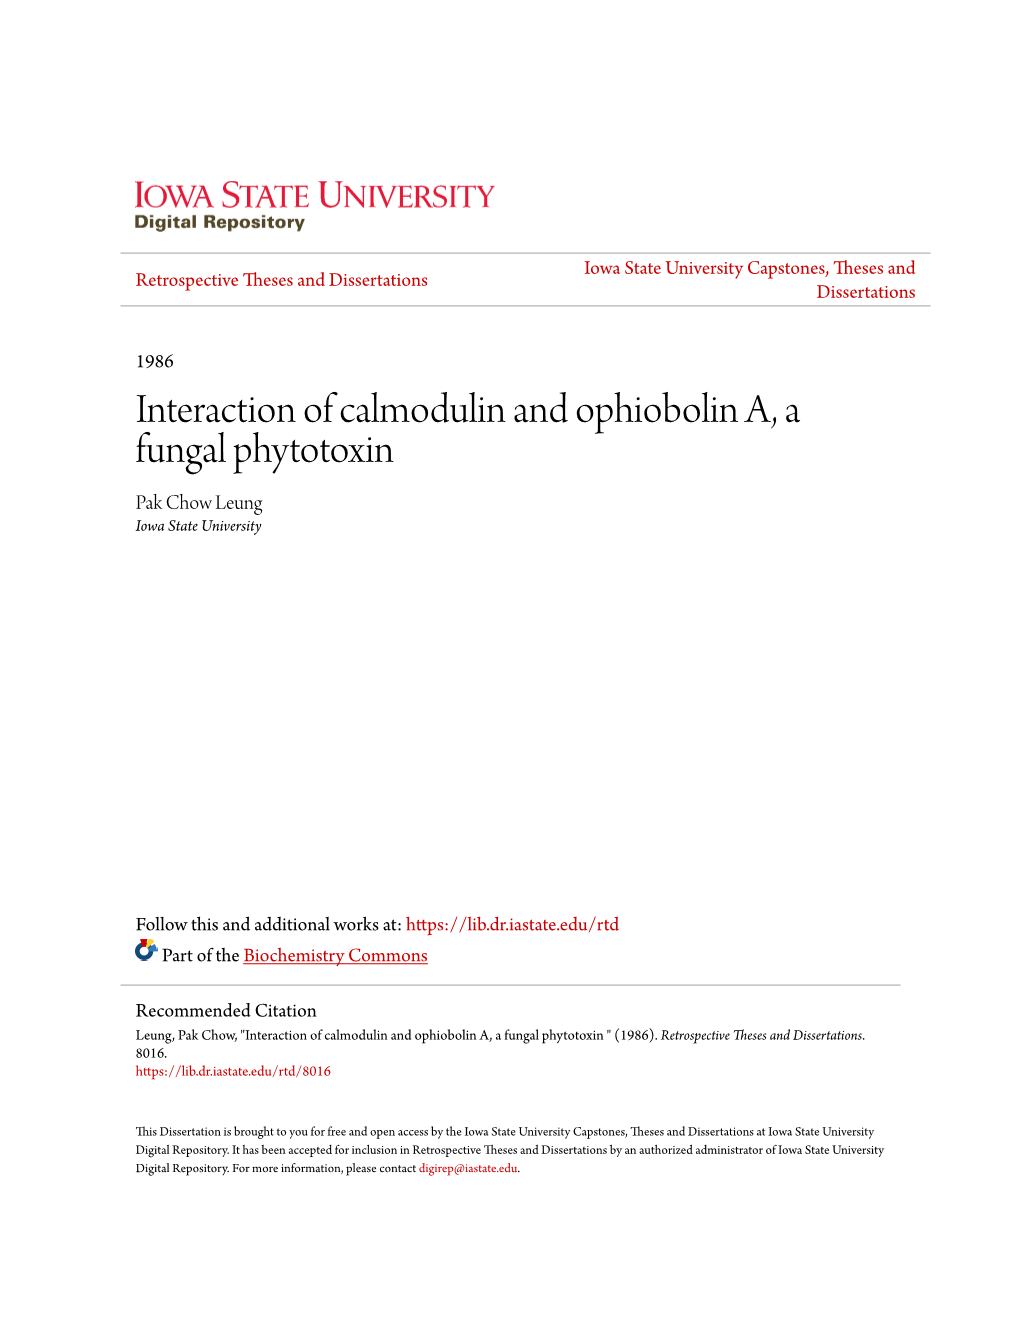 Interaction of Calmodulin and Ophiobolin A, a Fungal Phytotoxin Pak Chow Leung Iowa State University